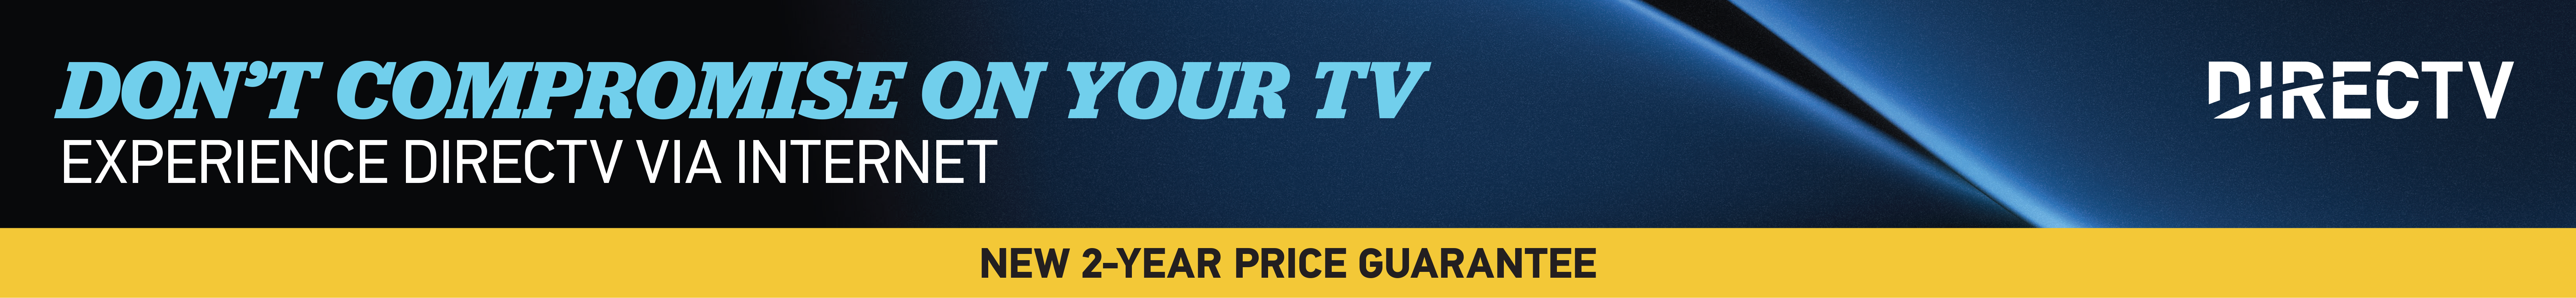 Don't Compromise on your TV - Experience DIRECTV via Internet - New 2-Year Price Guarantee